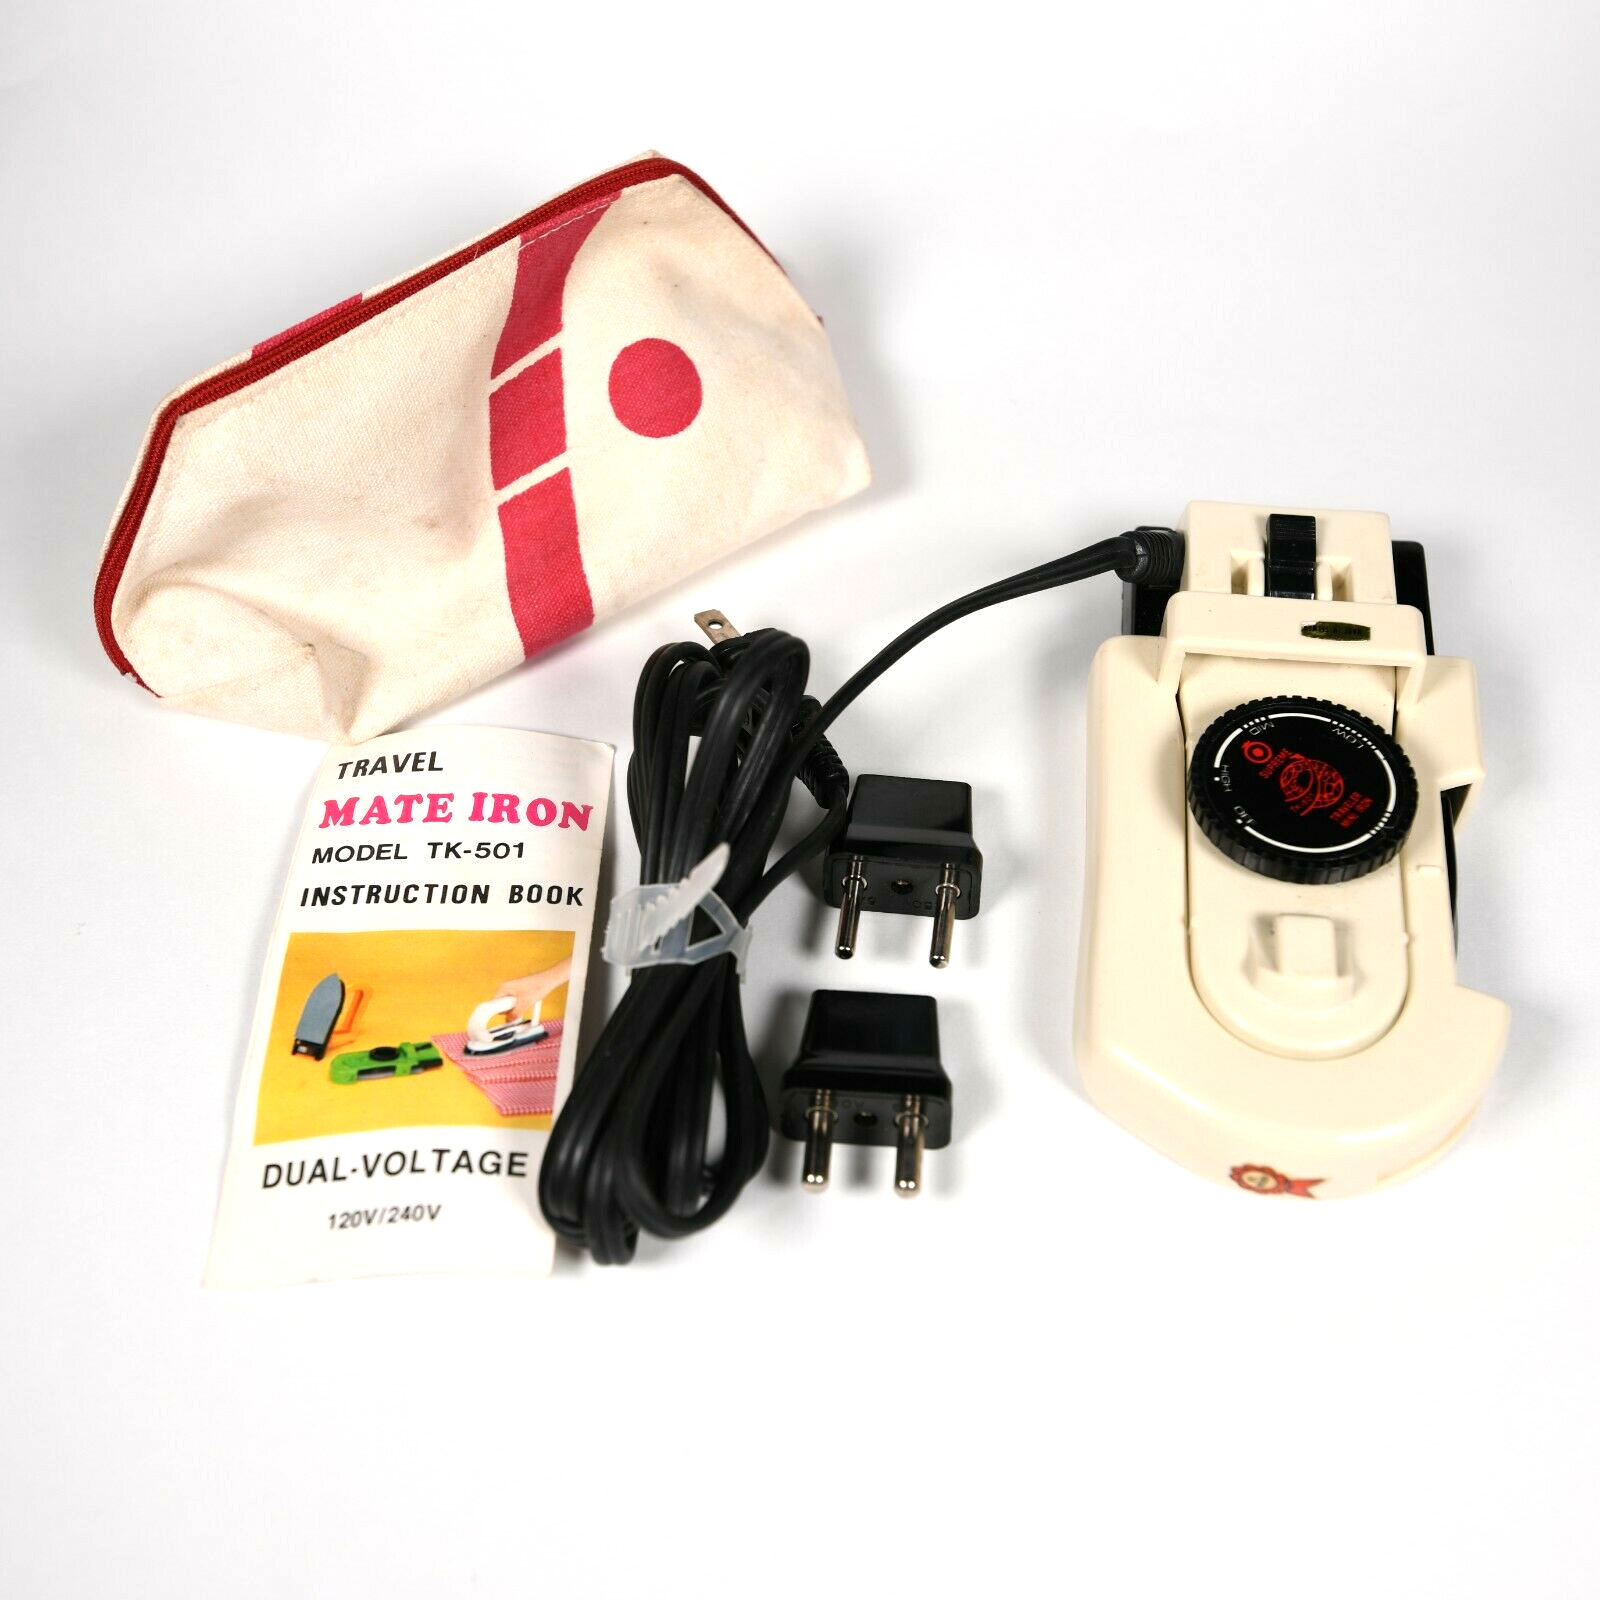 Vintage The Mini Travel Iron, Model TK-501 w/manual, adapters and travel bag